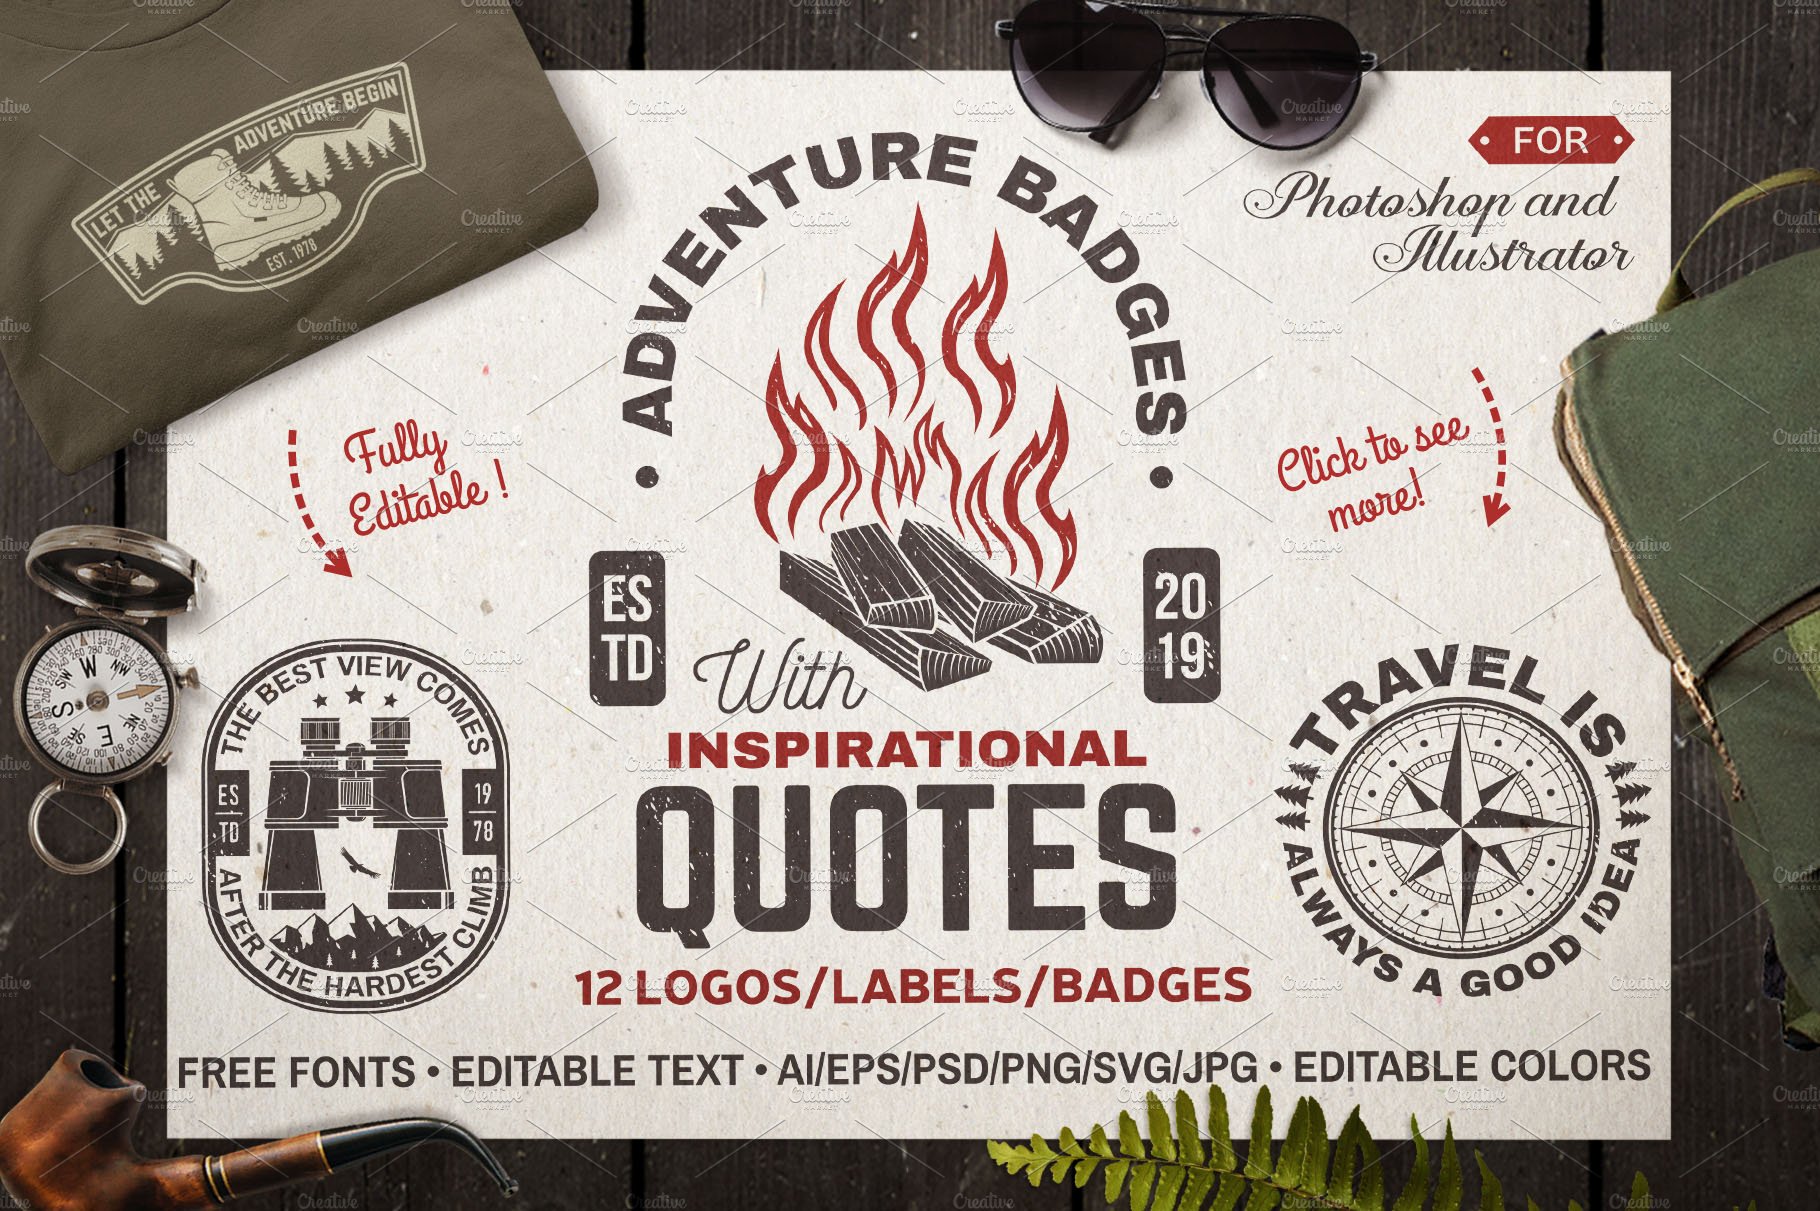 Adventure Badges cover image.